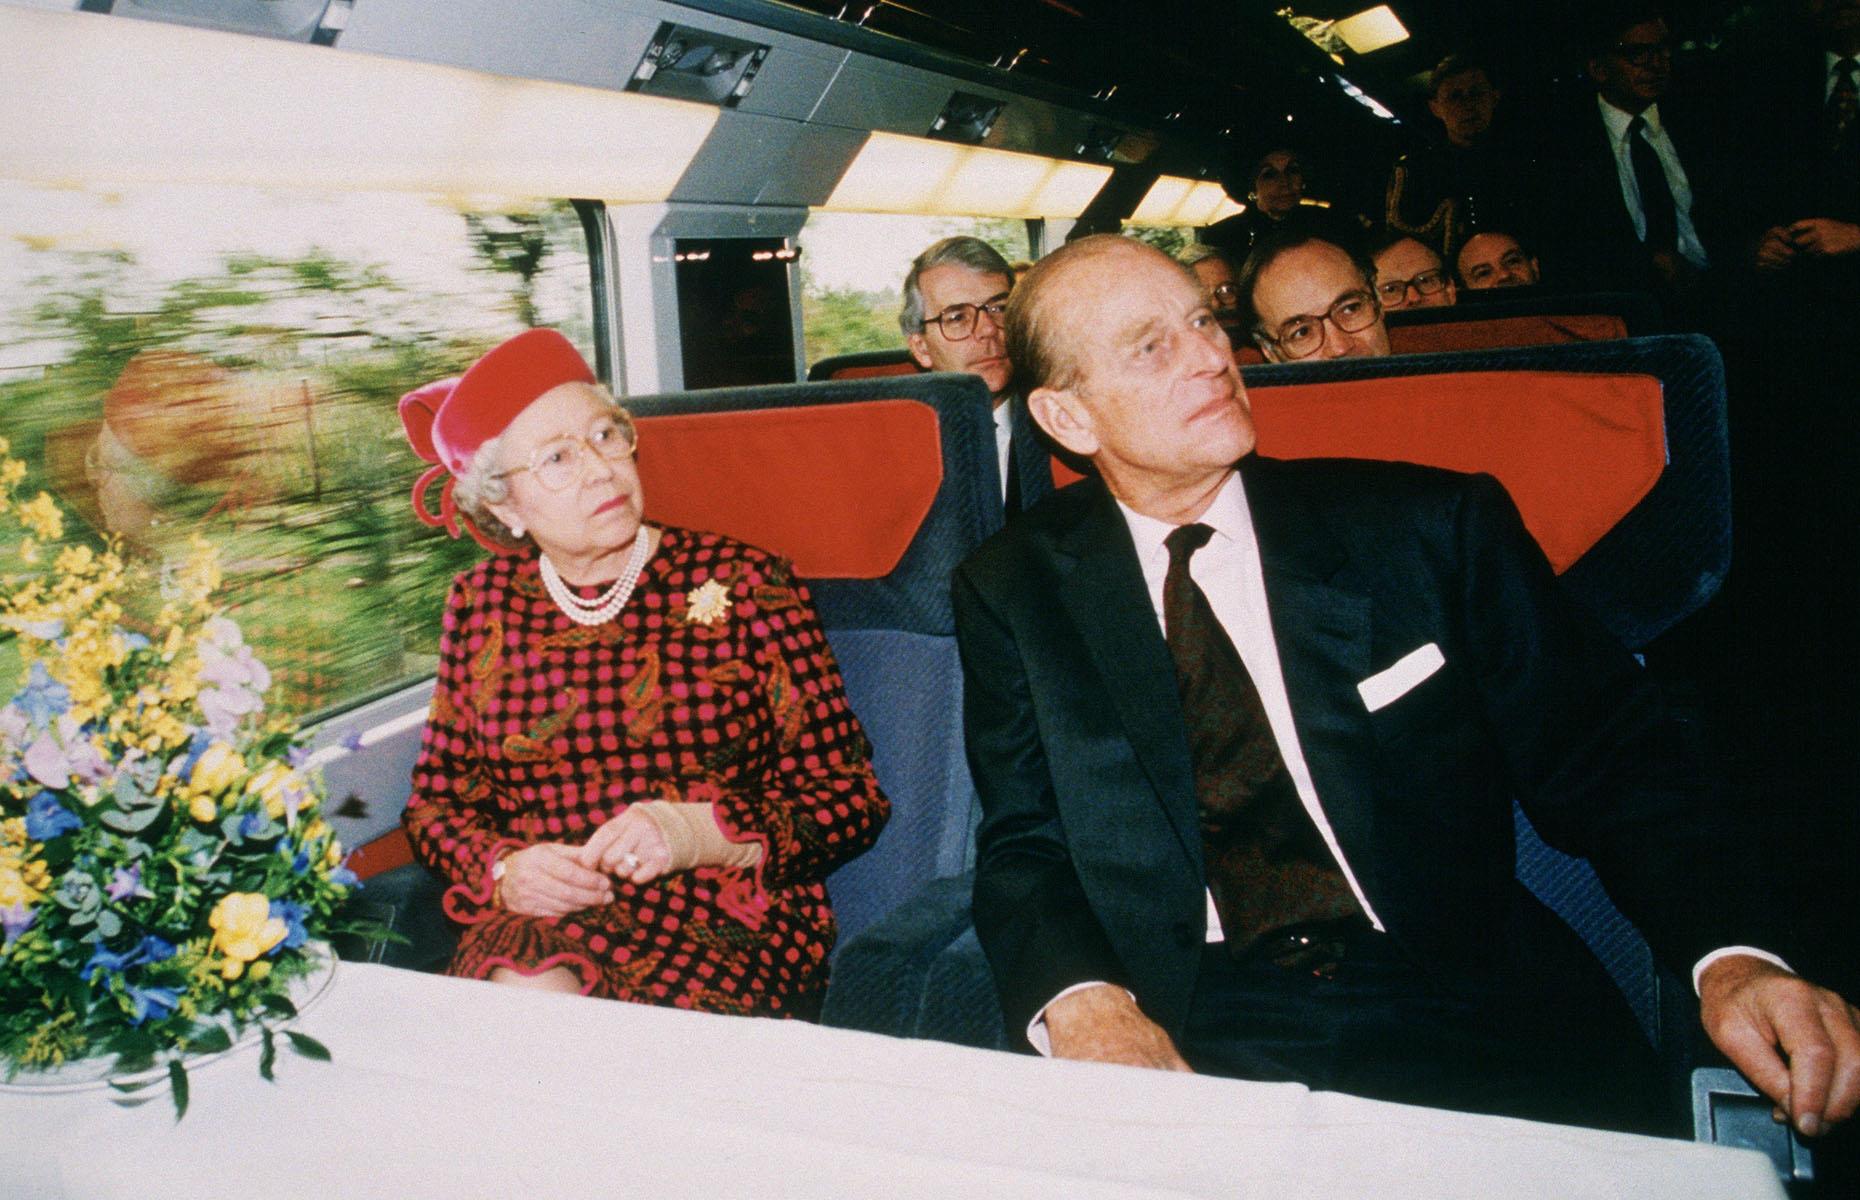 The dream of a tunnel and a train connecting mainland Europe and the UK finally came true in 1994 when both the Eurotunnel and Eurostar were launched. Here, Queen Elizabeth II and Prince Philip are joined by Prime Minister John Major (sitting behind the Queen) aboard a Eurostar train on the inauguration of the tunnel on 6 May 1994.